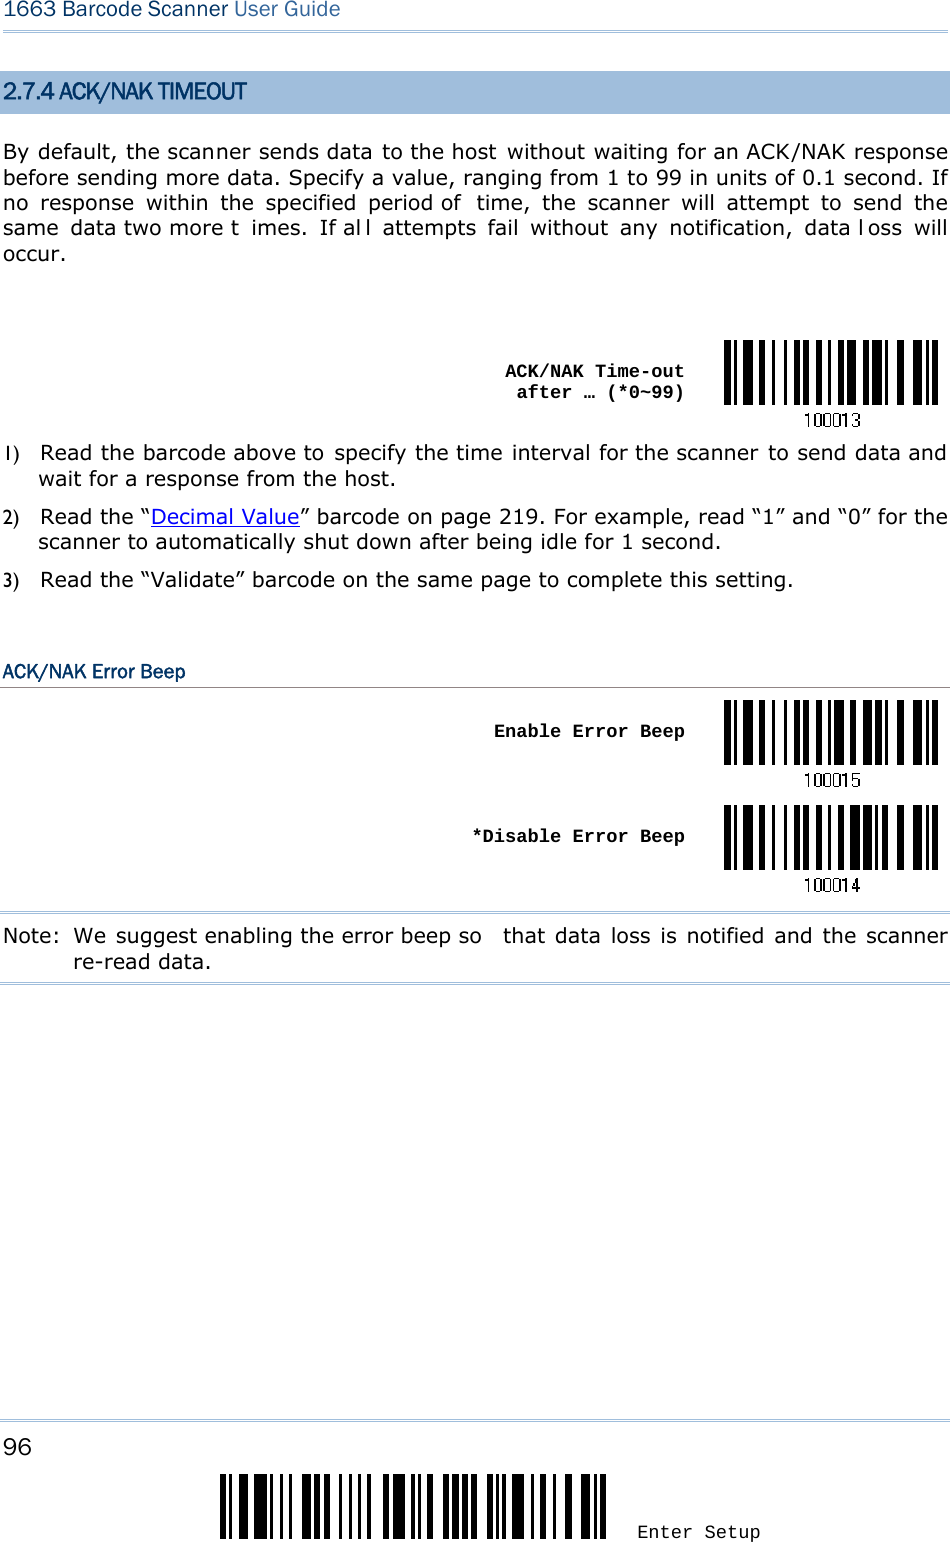 96 Enter Setup 1663 Barcode Scanner User Guide  2.7.4 ACK/NAK TIMEOUT By default, the scanner sends data to the host without waiting for an ACK/NAK response before sending more data. Specify a value, ranging from 1 to 99 in units of 0.1 second. If no response within the specified period of  time, the scanner will attempt to send the same data two more t imes. If al l attempts fail without any notification, data l oss will occur.   ACK/NAK Time-out after … (*0~99)1) Read the barcode above to specify the time interval for the scanner to send data and wait for a response from the host.             2) Read the “Decimal Value” barcode on page 219. For example, read “1” and “0” for the scanner to automatically shut down after being idle for 1 second.   3) Read the “Validate” barcode on the same page to complete this setting.  ACK/NAK Error Beep  Enable Error Beep *Disable Error BeepNote: We suggest enabling the error beep so  that data loss is notified and the scanner re-read data.         